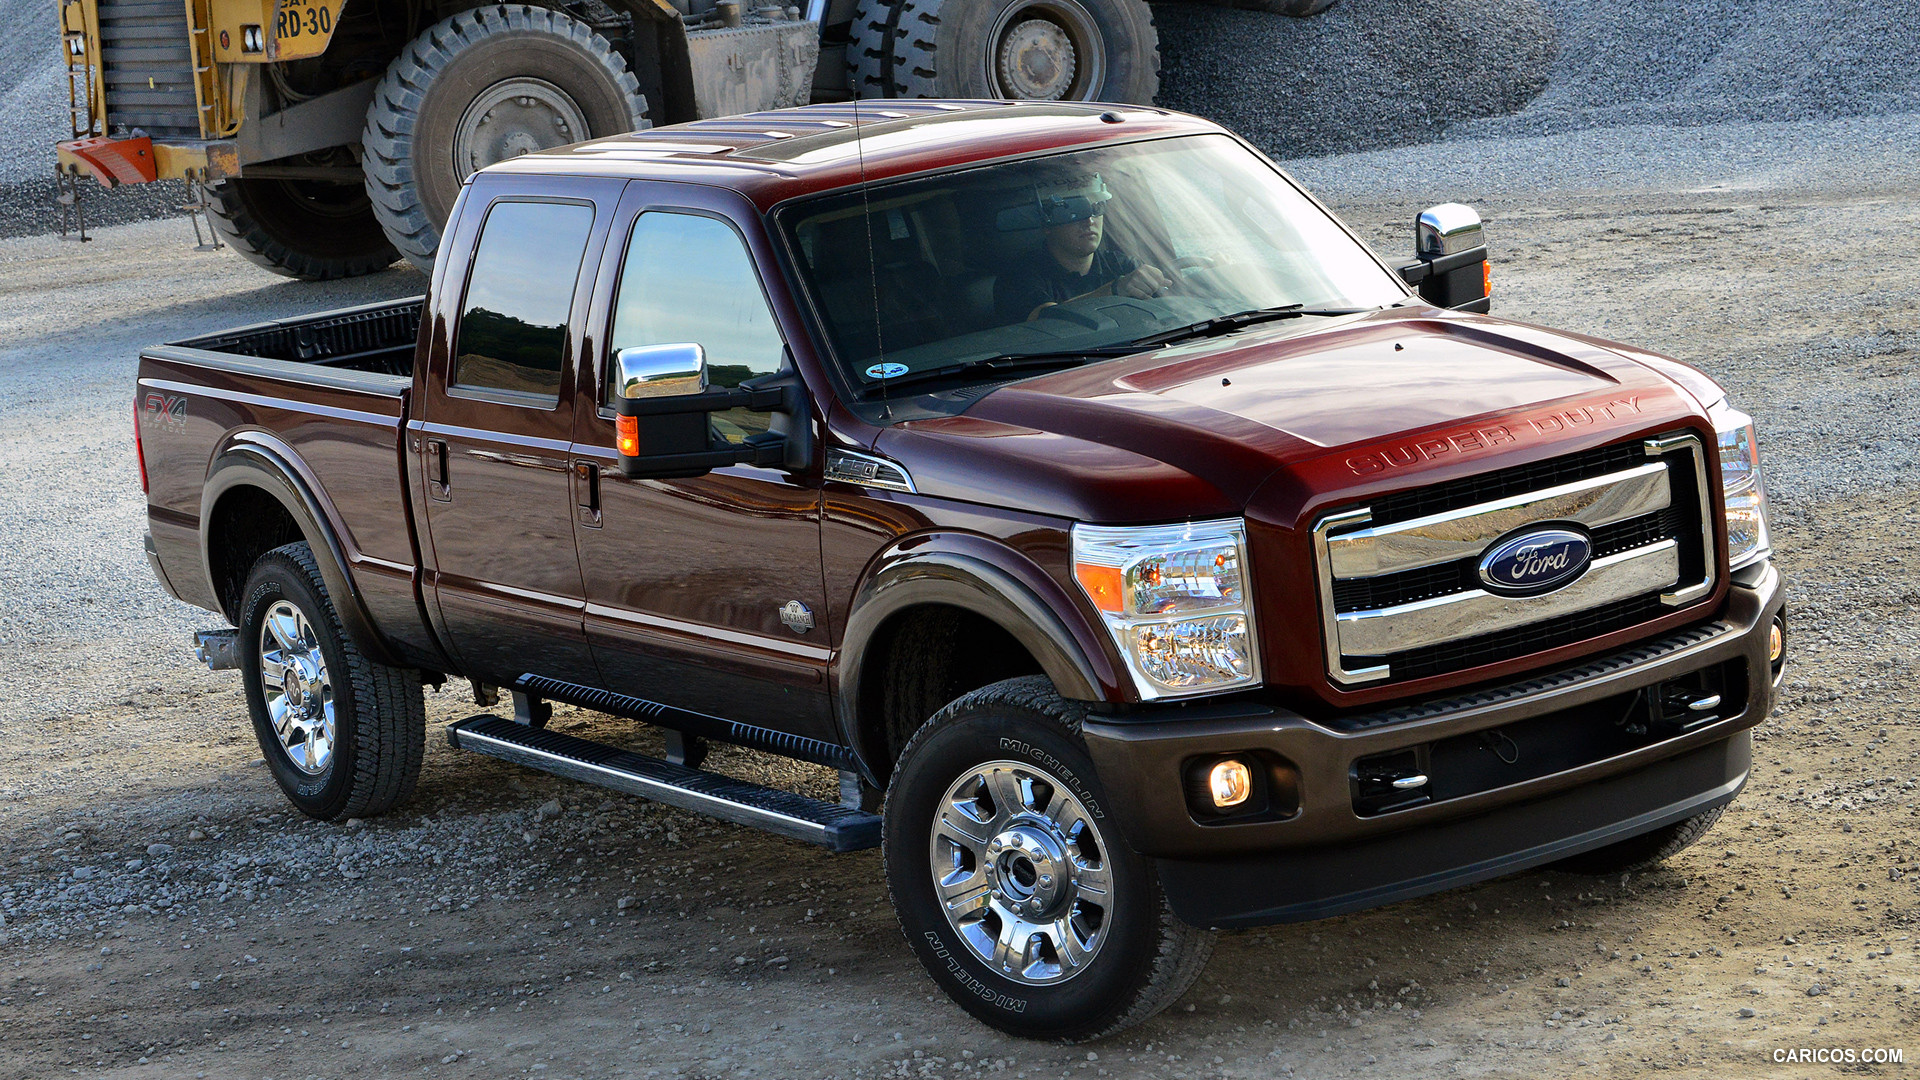 HQ Ford F-250 Super Duty King Ranch Wallpapers | File 1004.33Kb